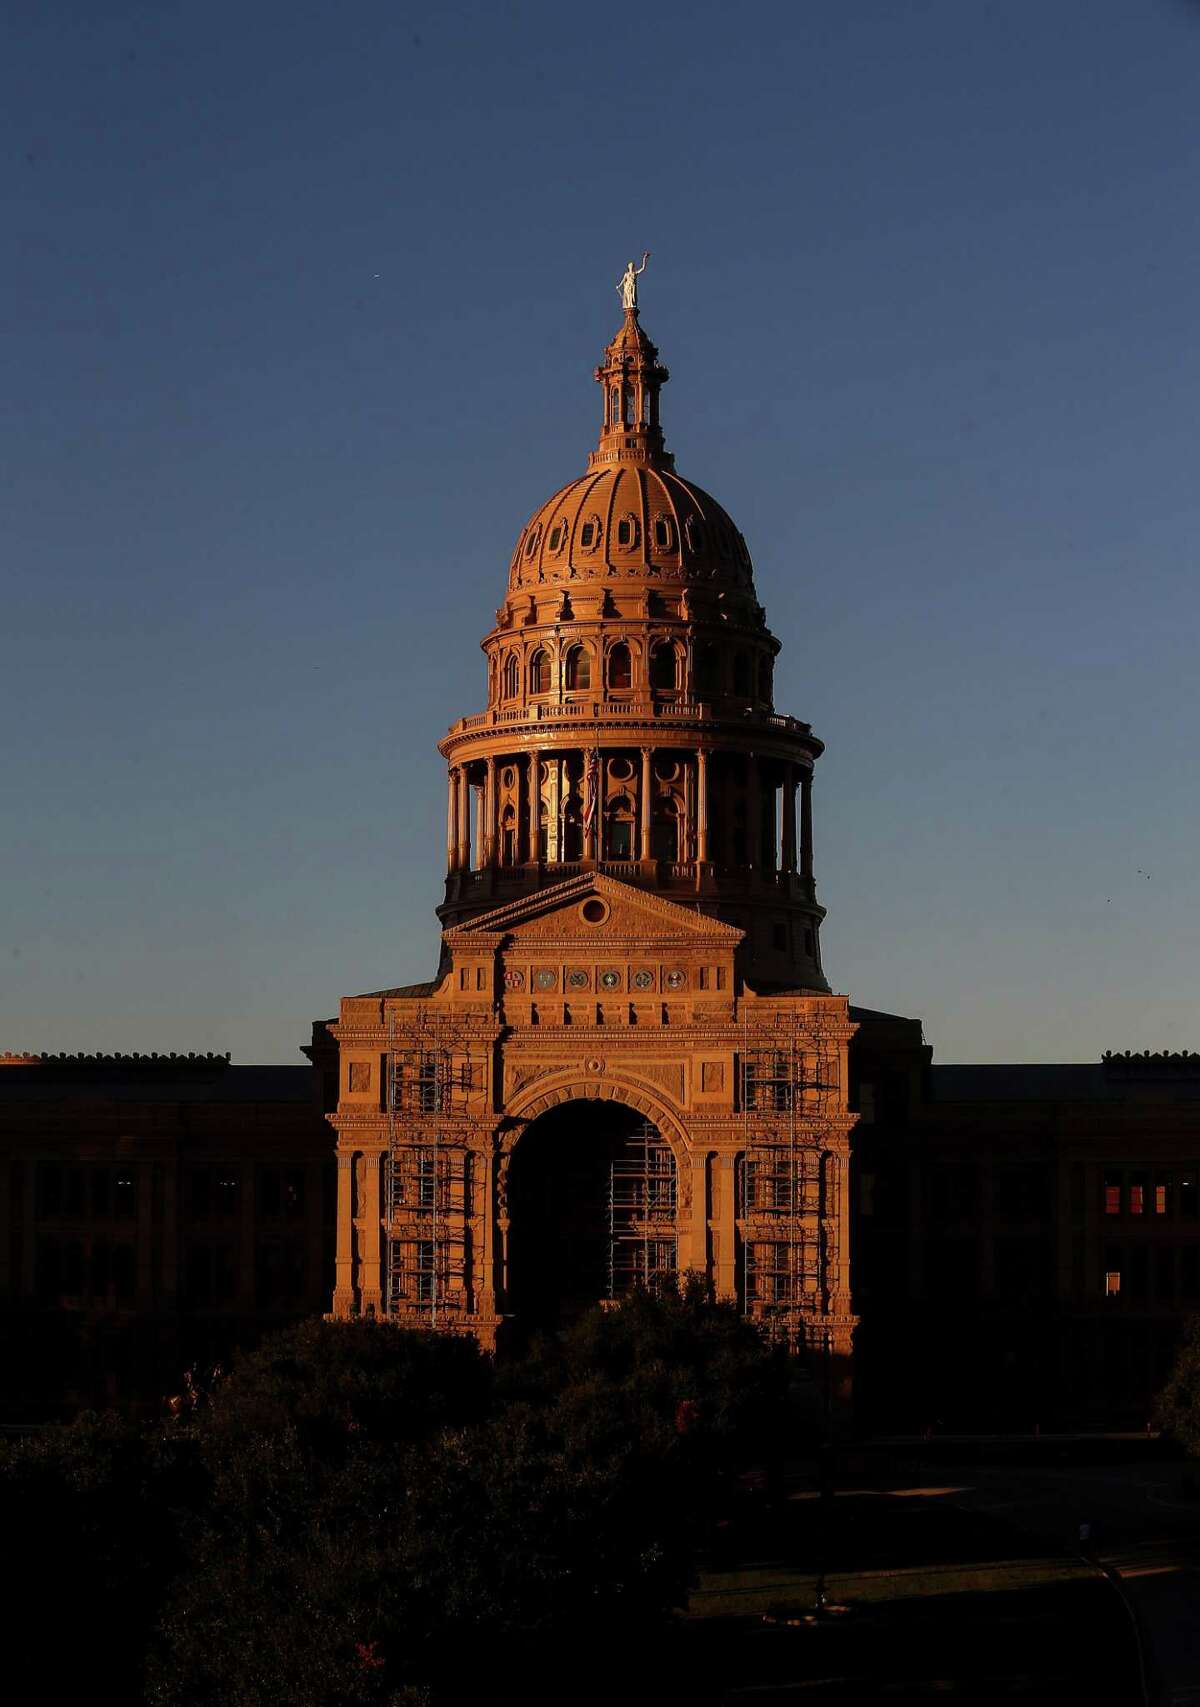 The sun sets over the Texas Capitol on Friday, Oct. 21, 2016, in Austin.